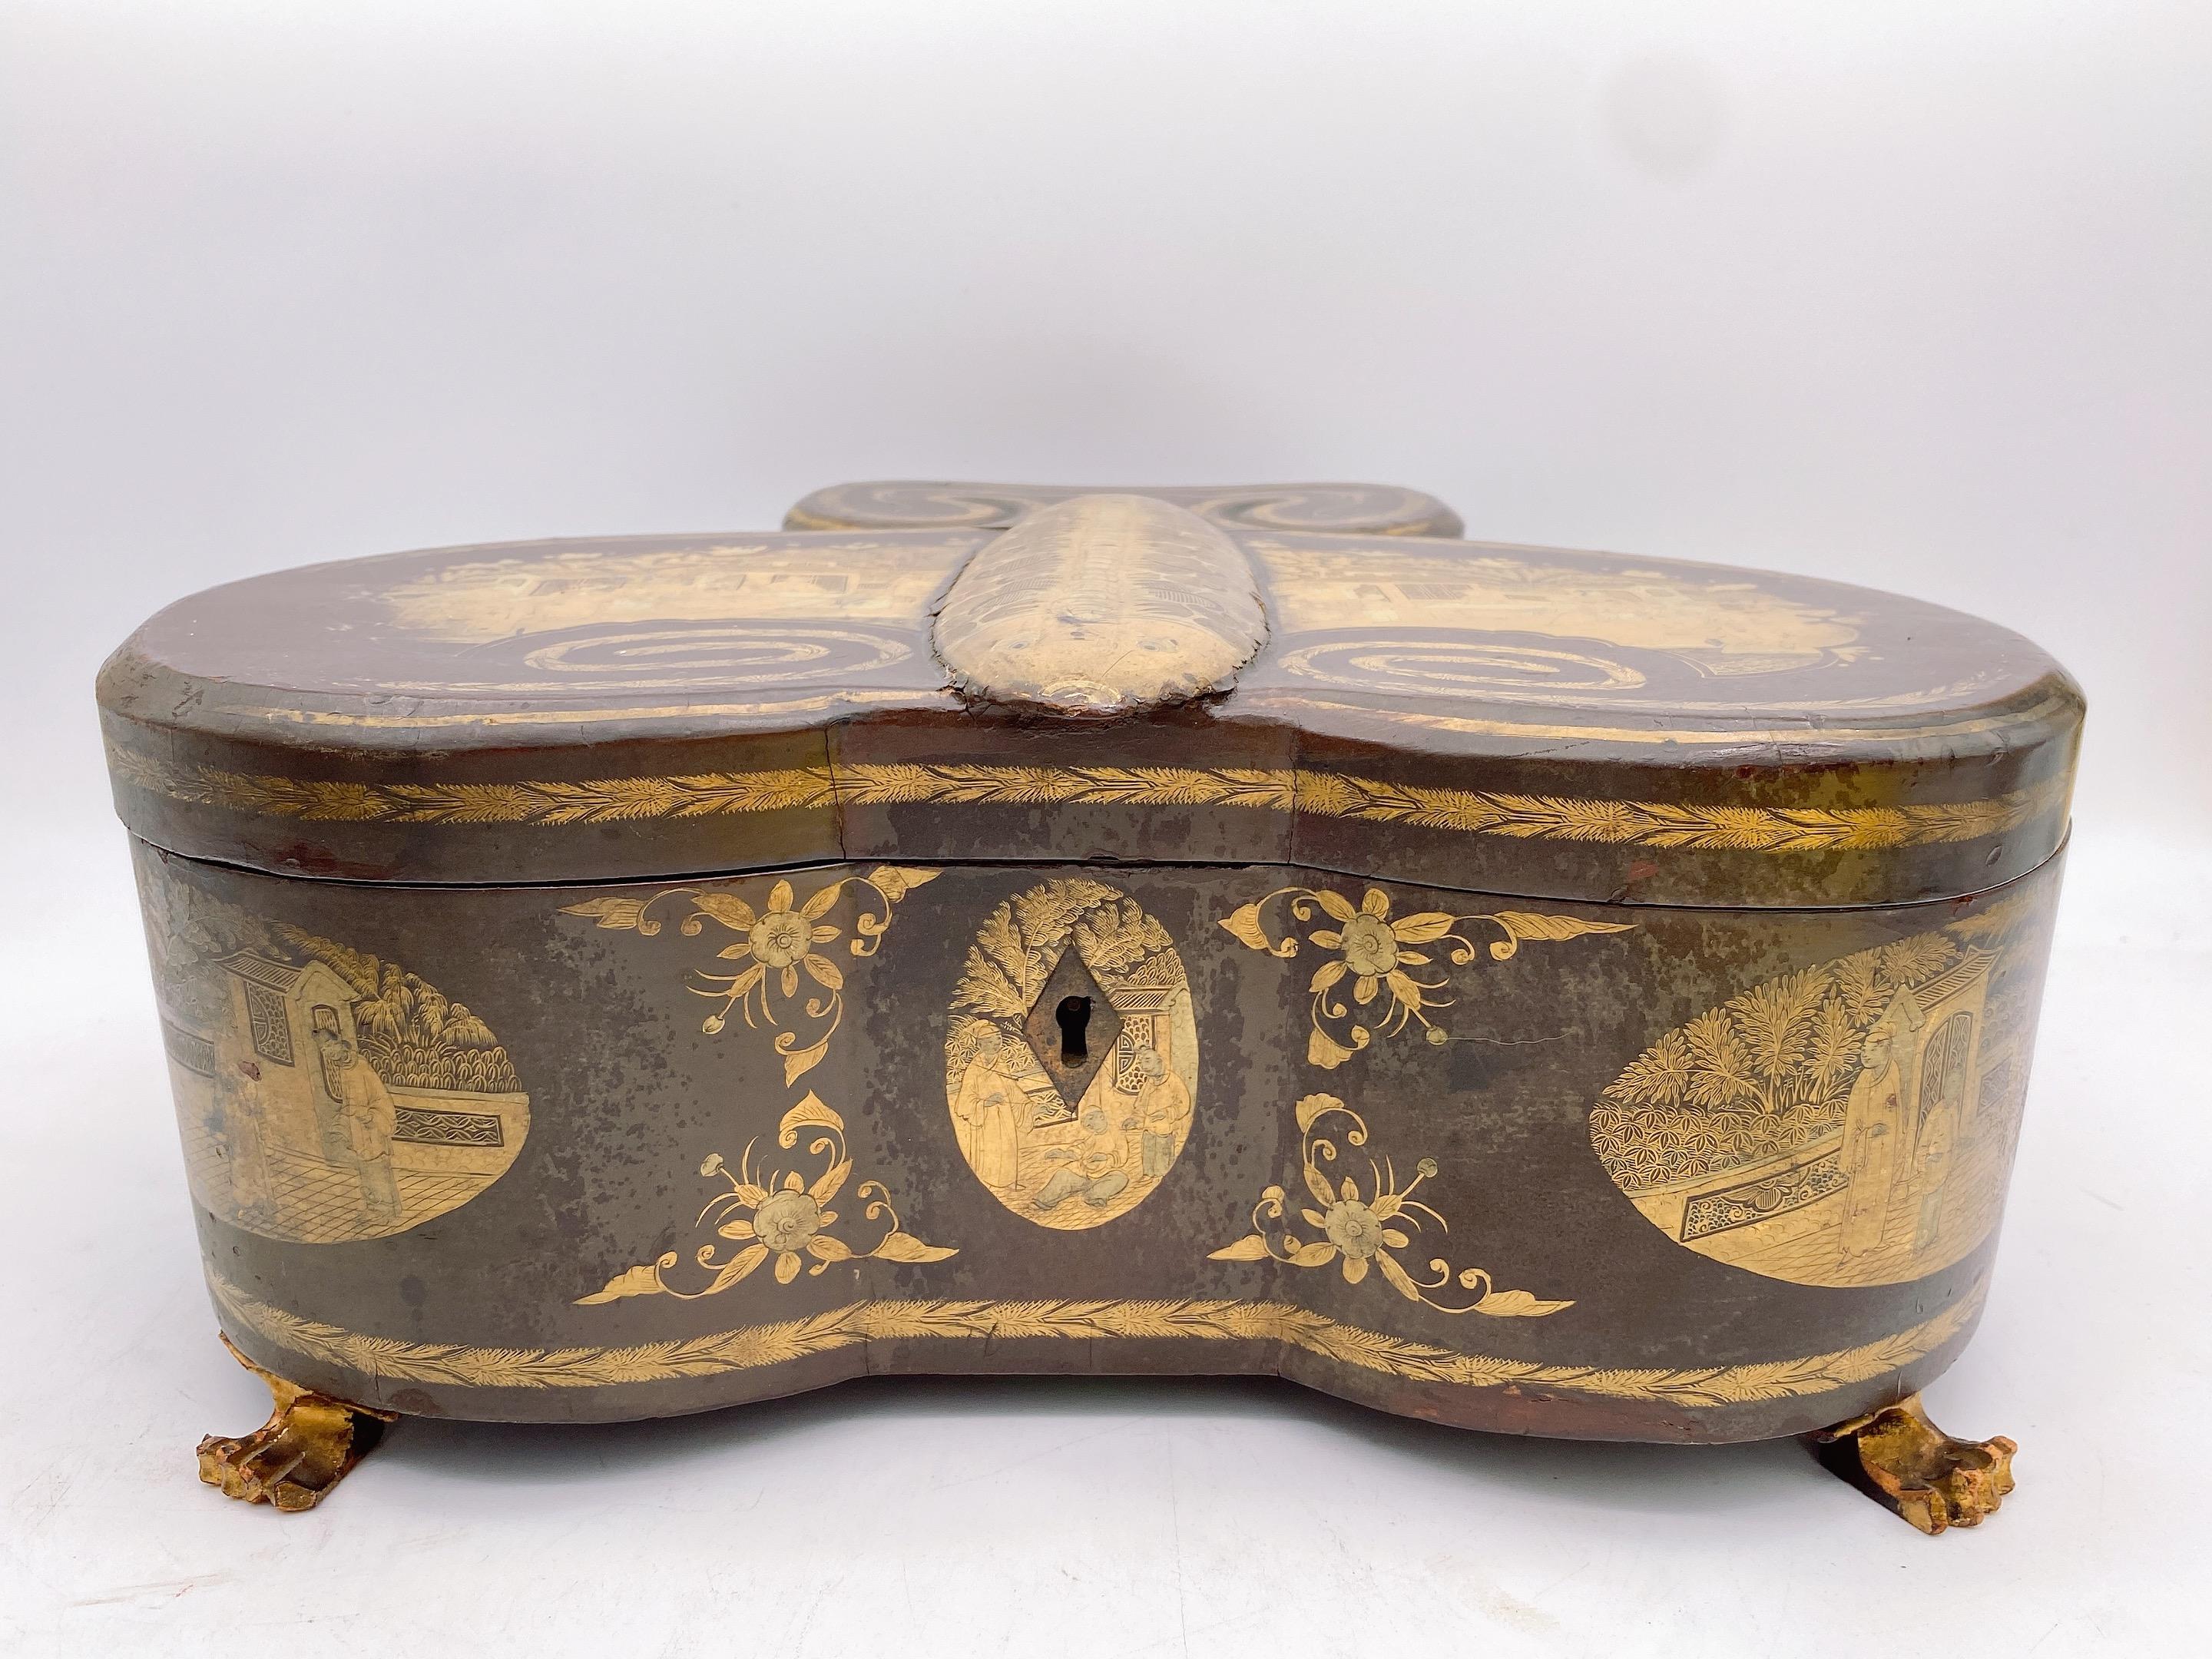 Rare 19th Century Antique Chinese Gilt Lacquer Butterfly Cased Pewter Tea Caddy In Good Condition For Sale In Brea, CA